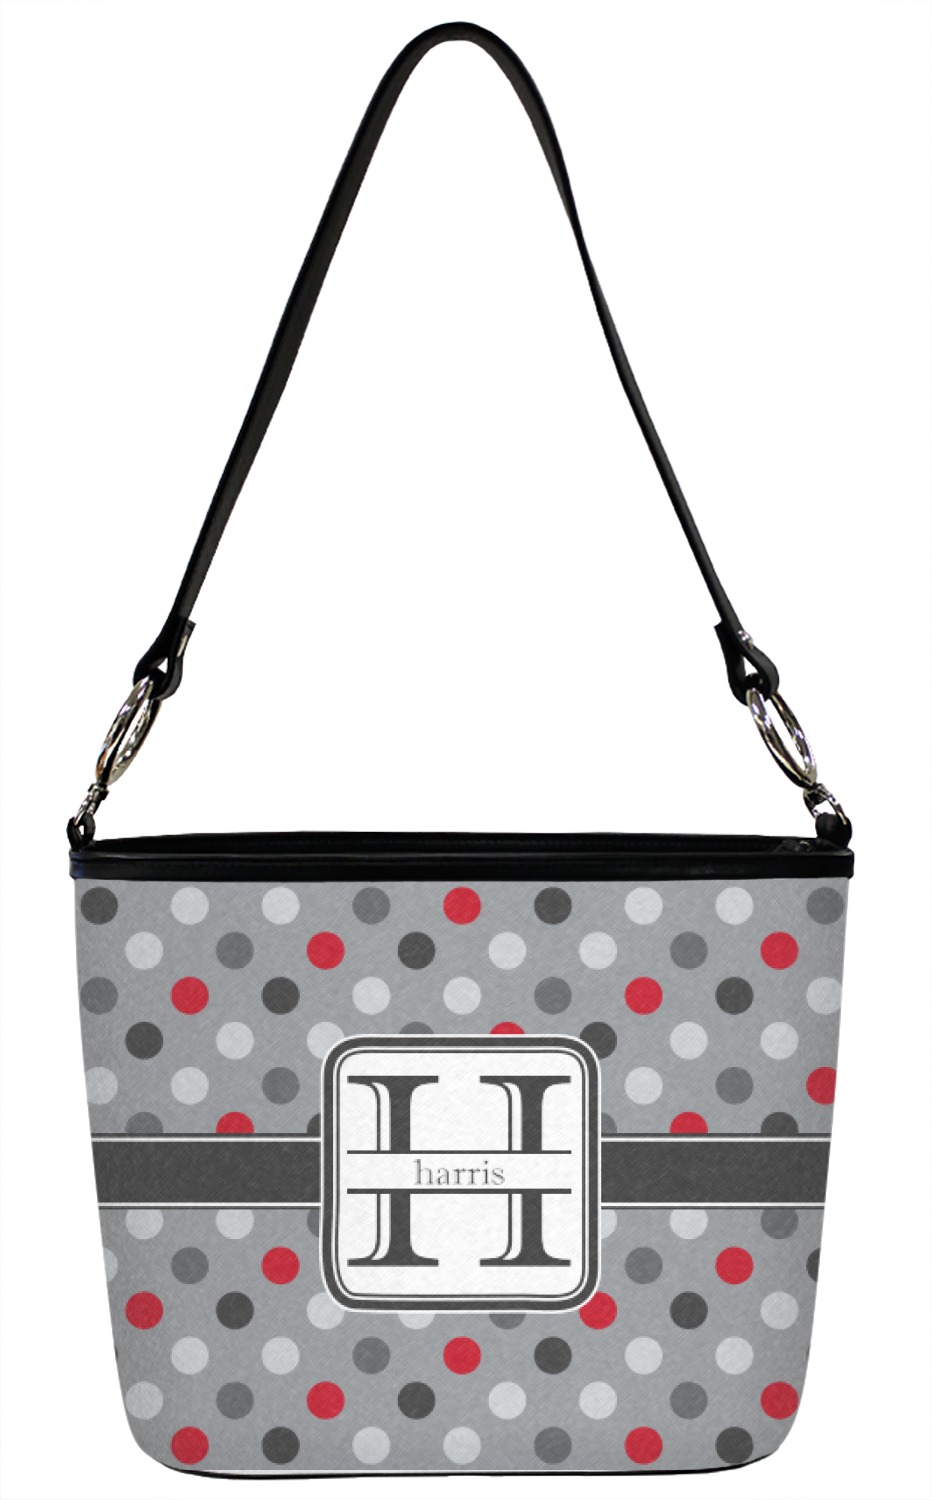 Polka Dots Bucket Bag w/Genuine Leather Trim Personalized Large Front & Back